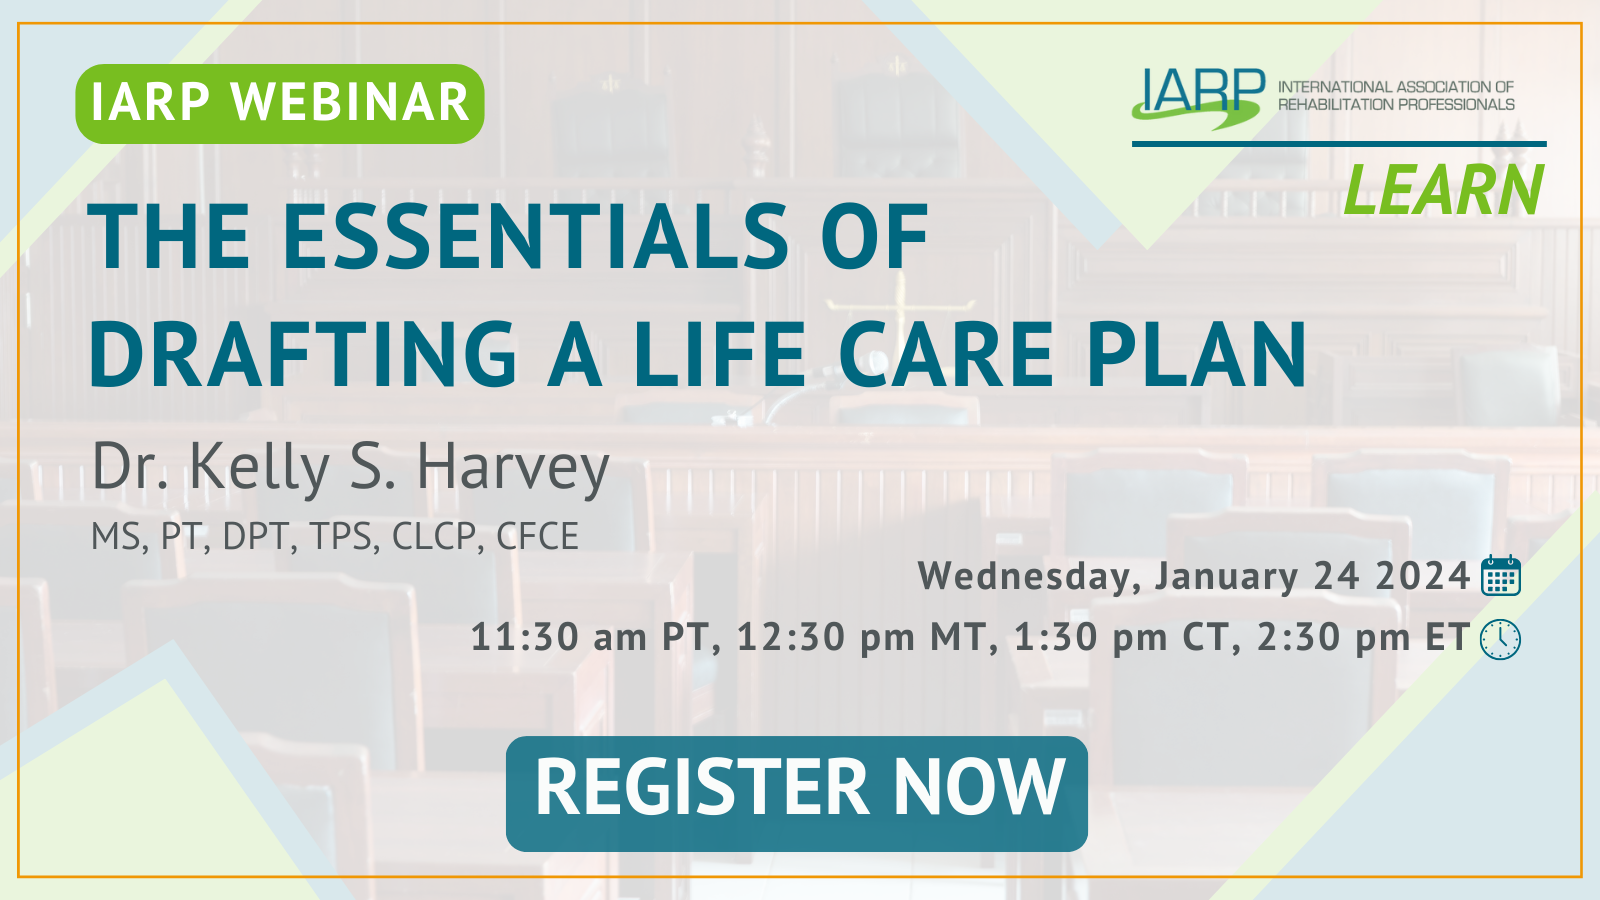 Upcoming Webinar: The Essentials of Drafting a Life Care Plan